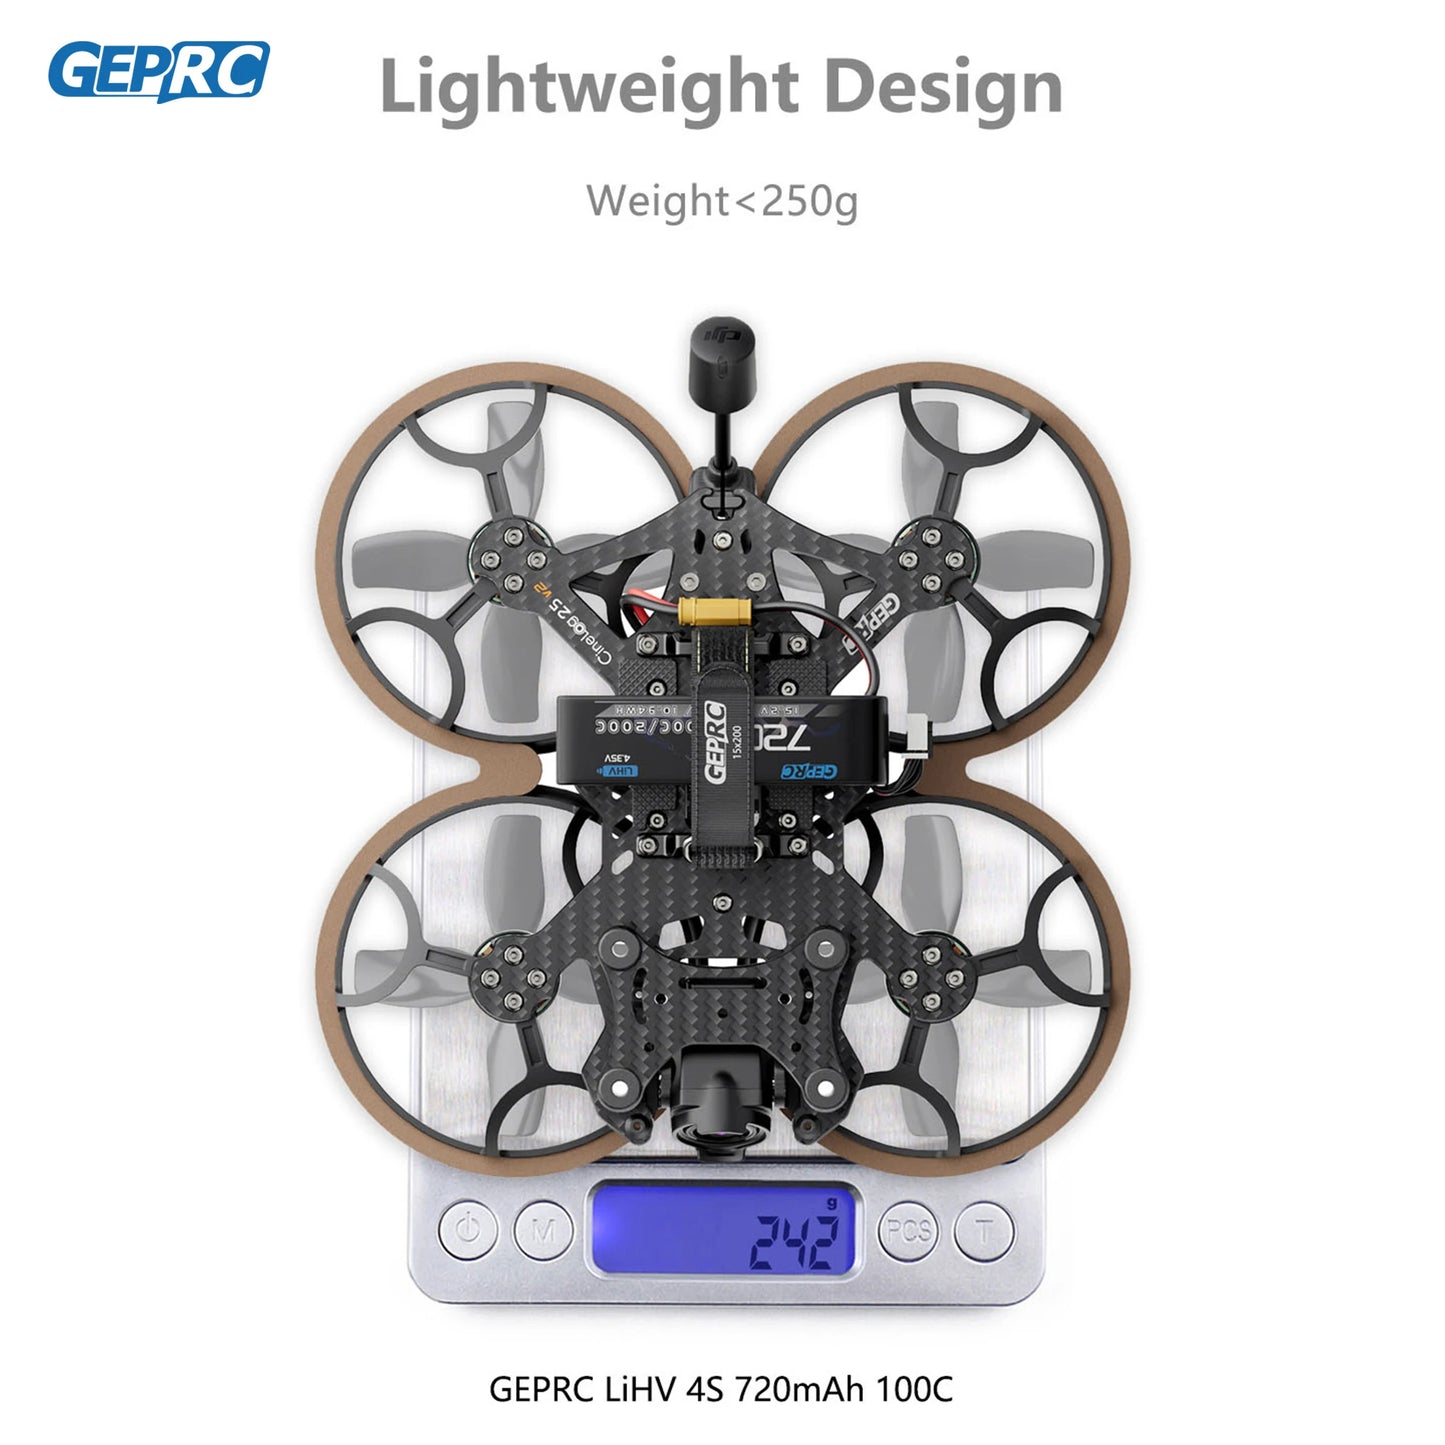 GEPRC Cinelog25 V2 HD O3 FPV - TAKER G4 35A AIO 1404 4500KV Motor BNF with Mini Video Freestyle RC GPS Quadcopter Drone Racing Kit